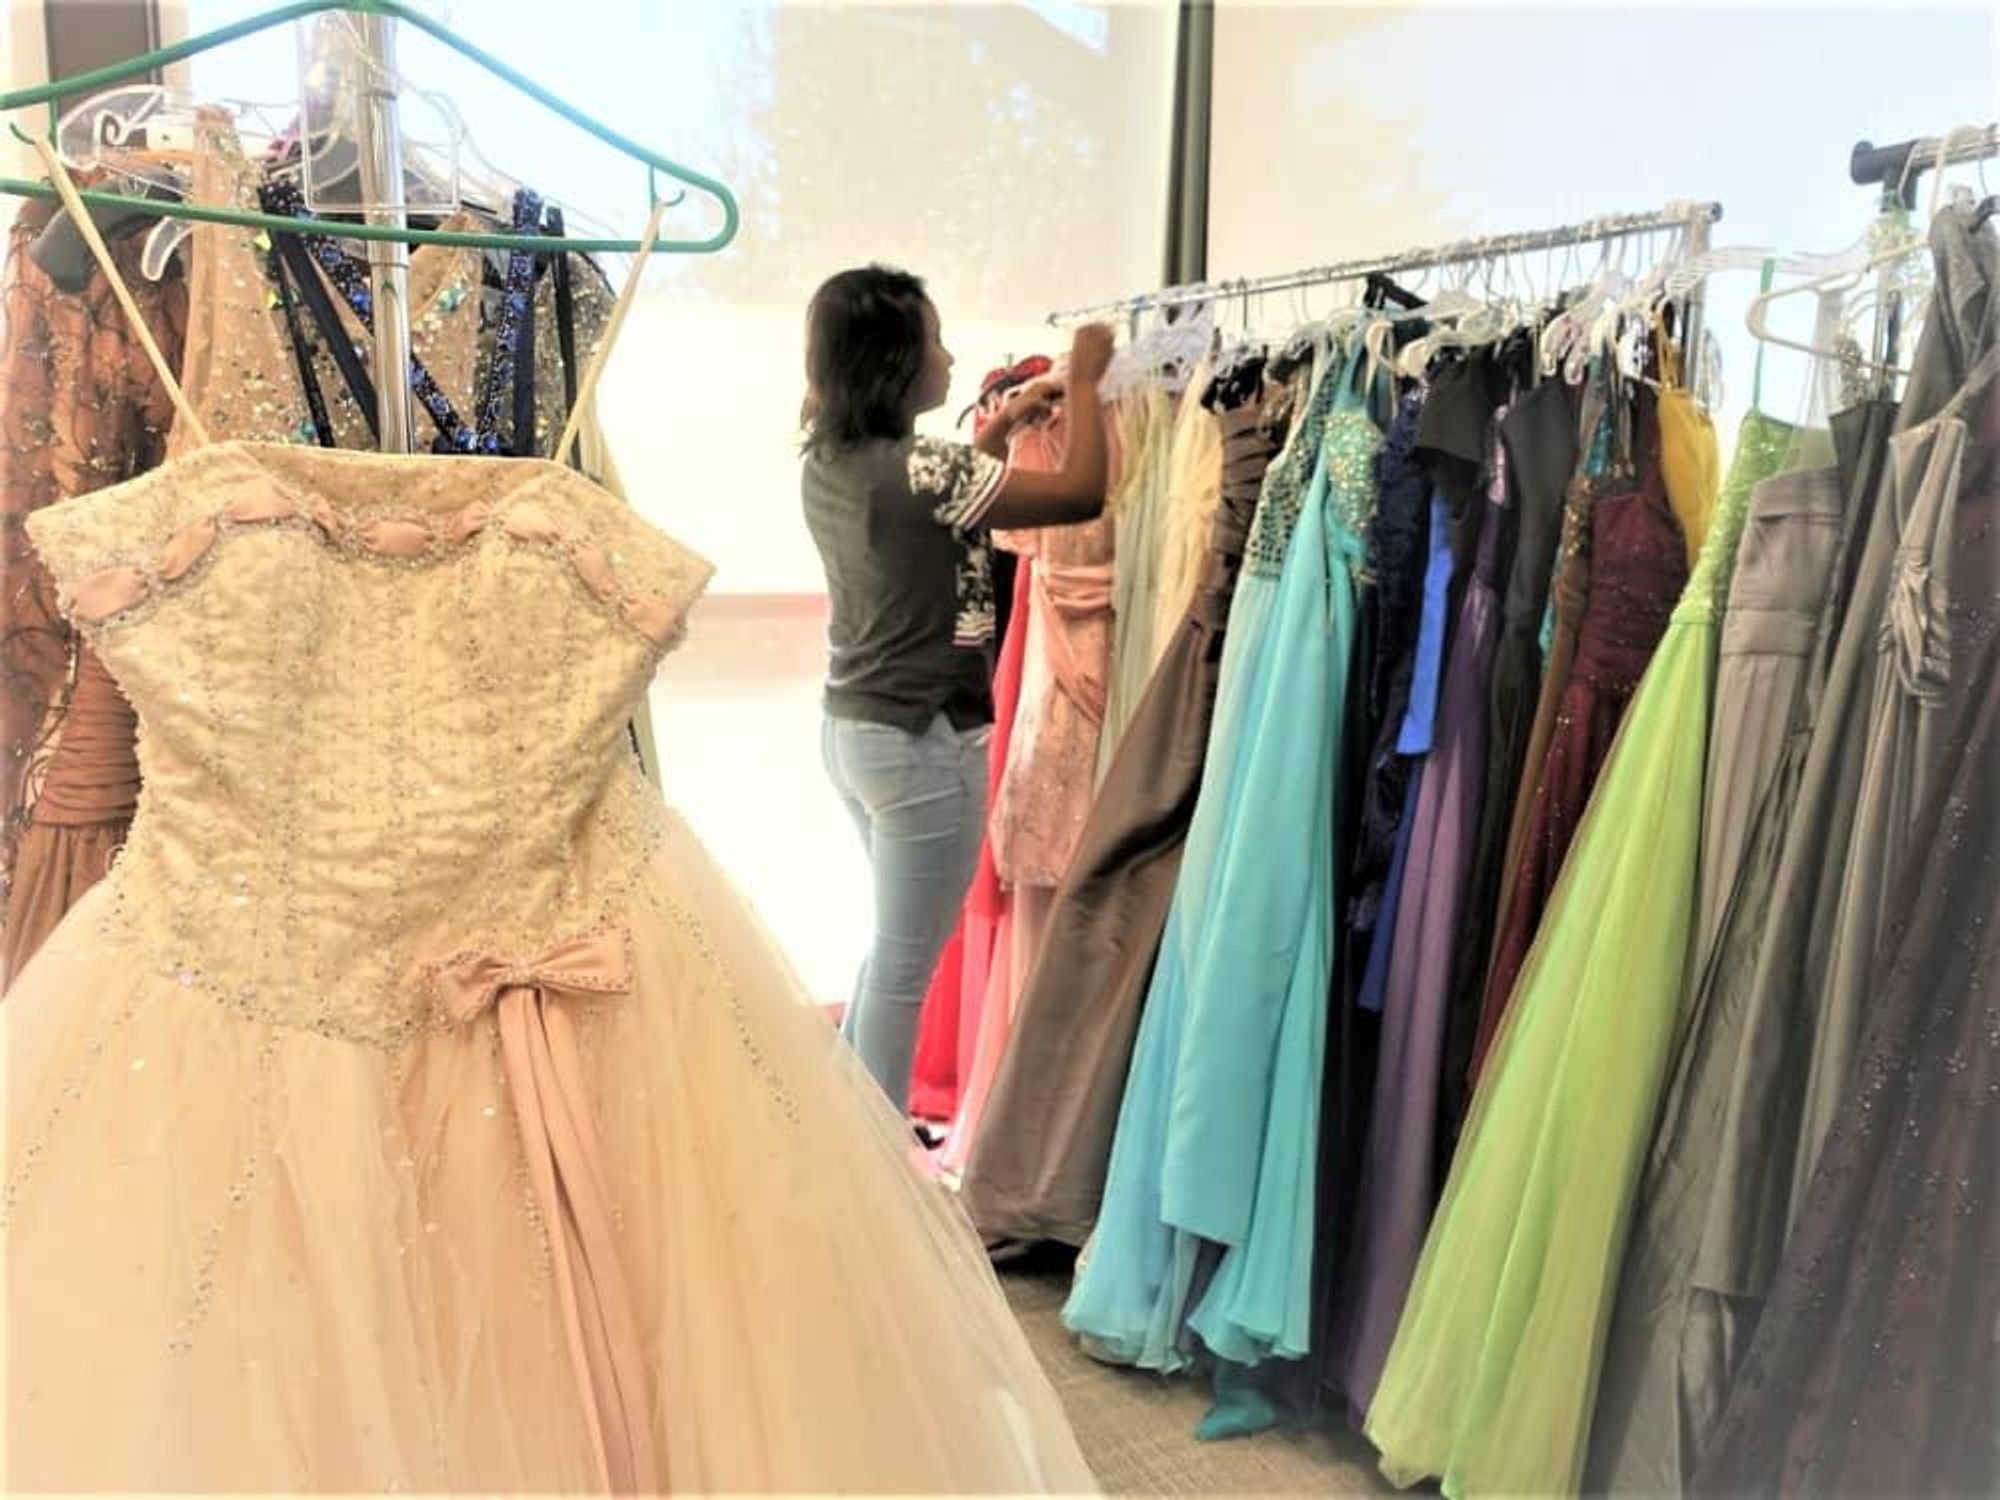 These Dallas-area prom dress drives help deserving teens dance the